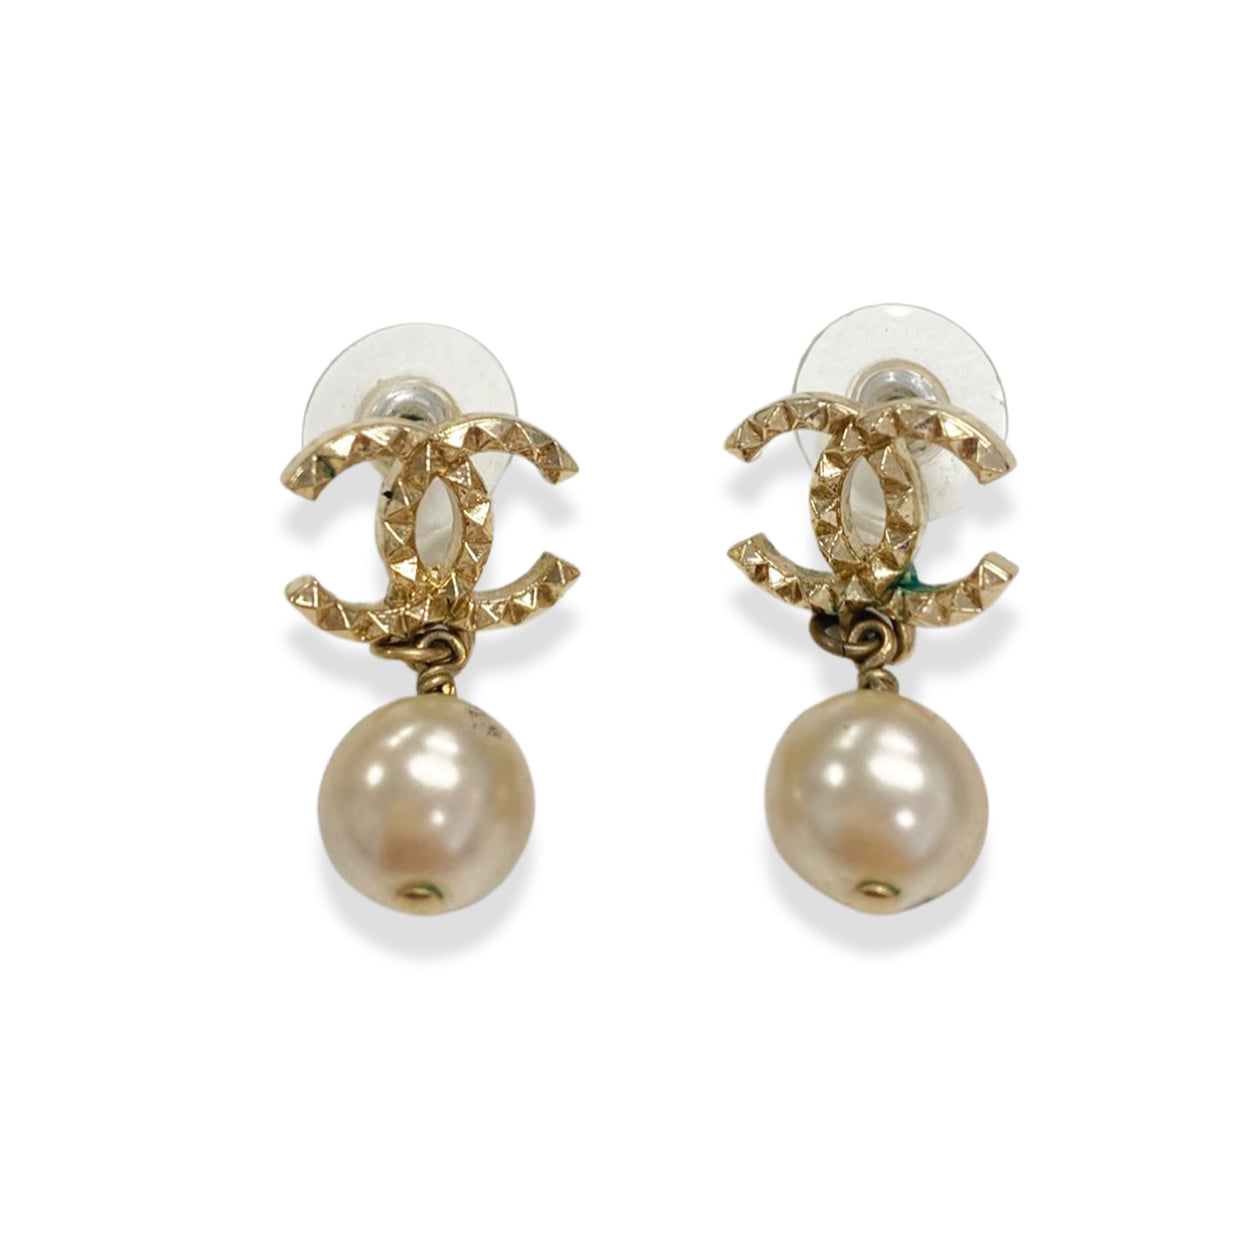 Chanel - Authenticated CC Earrings - Pearl Gold for Women, Very Good Condition